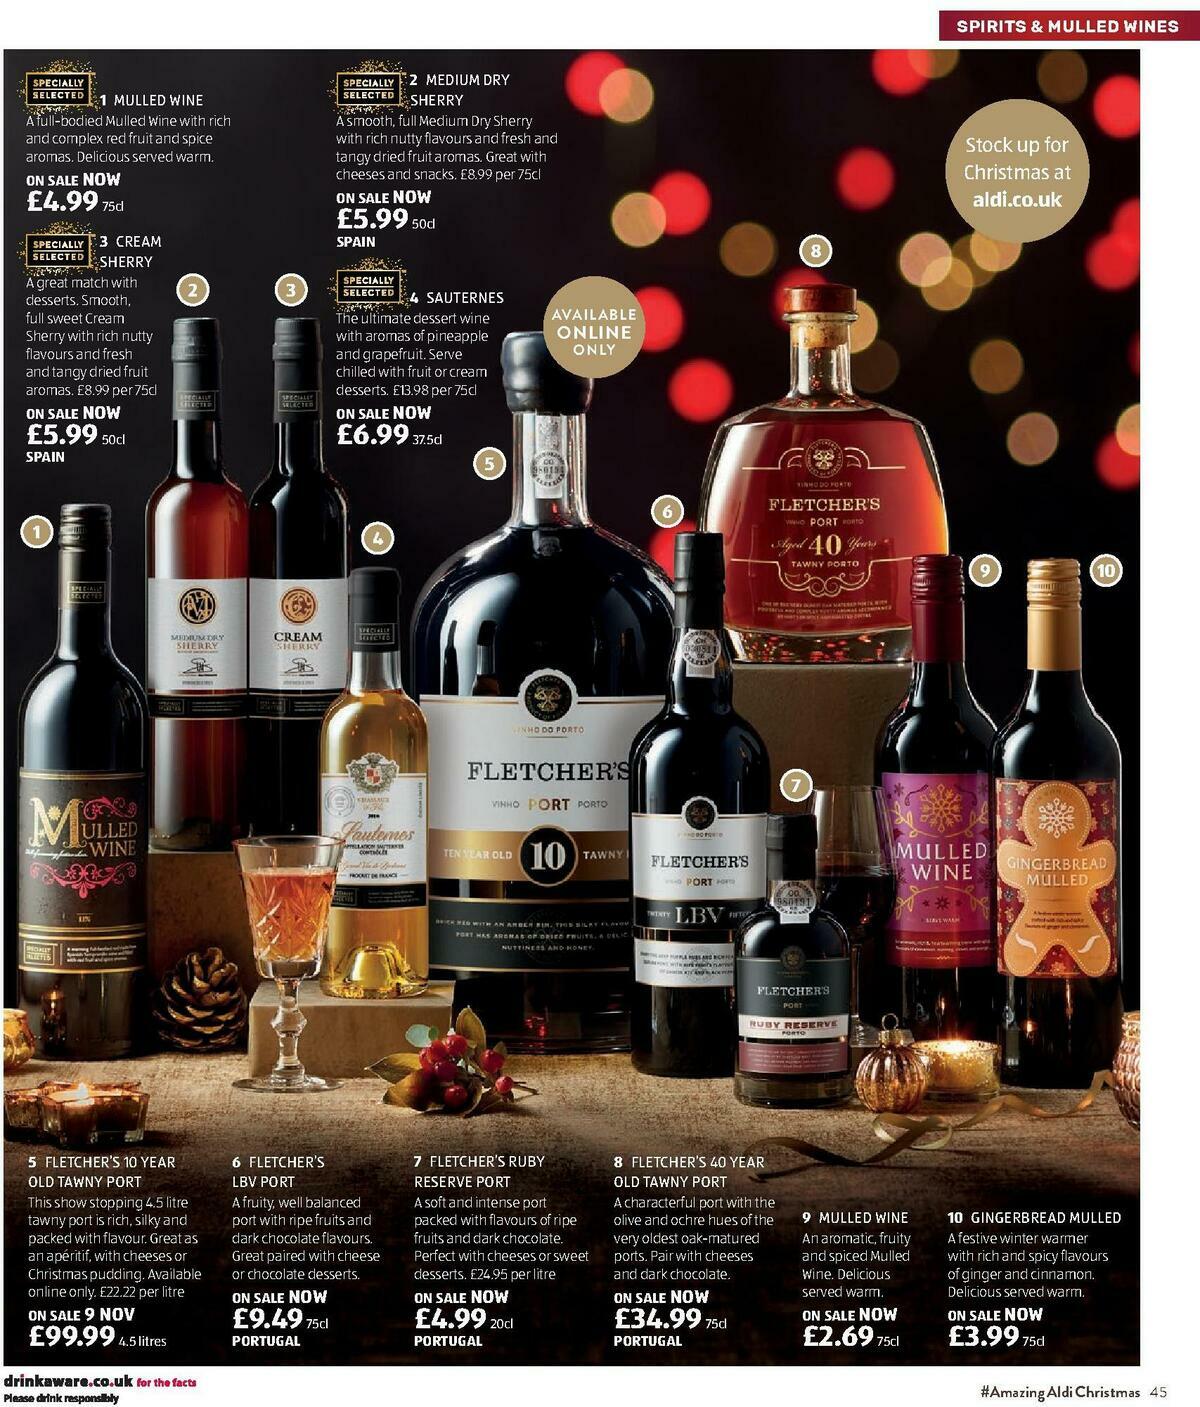 ALDI Christmas Brochure UK Offers & Special Buys for November 8 Page 45